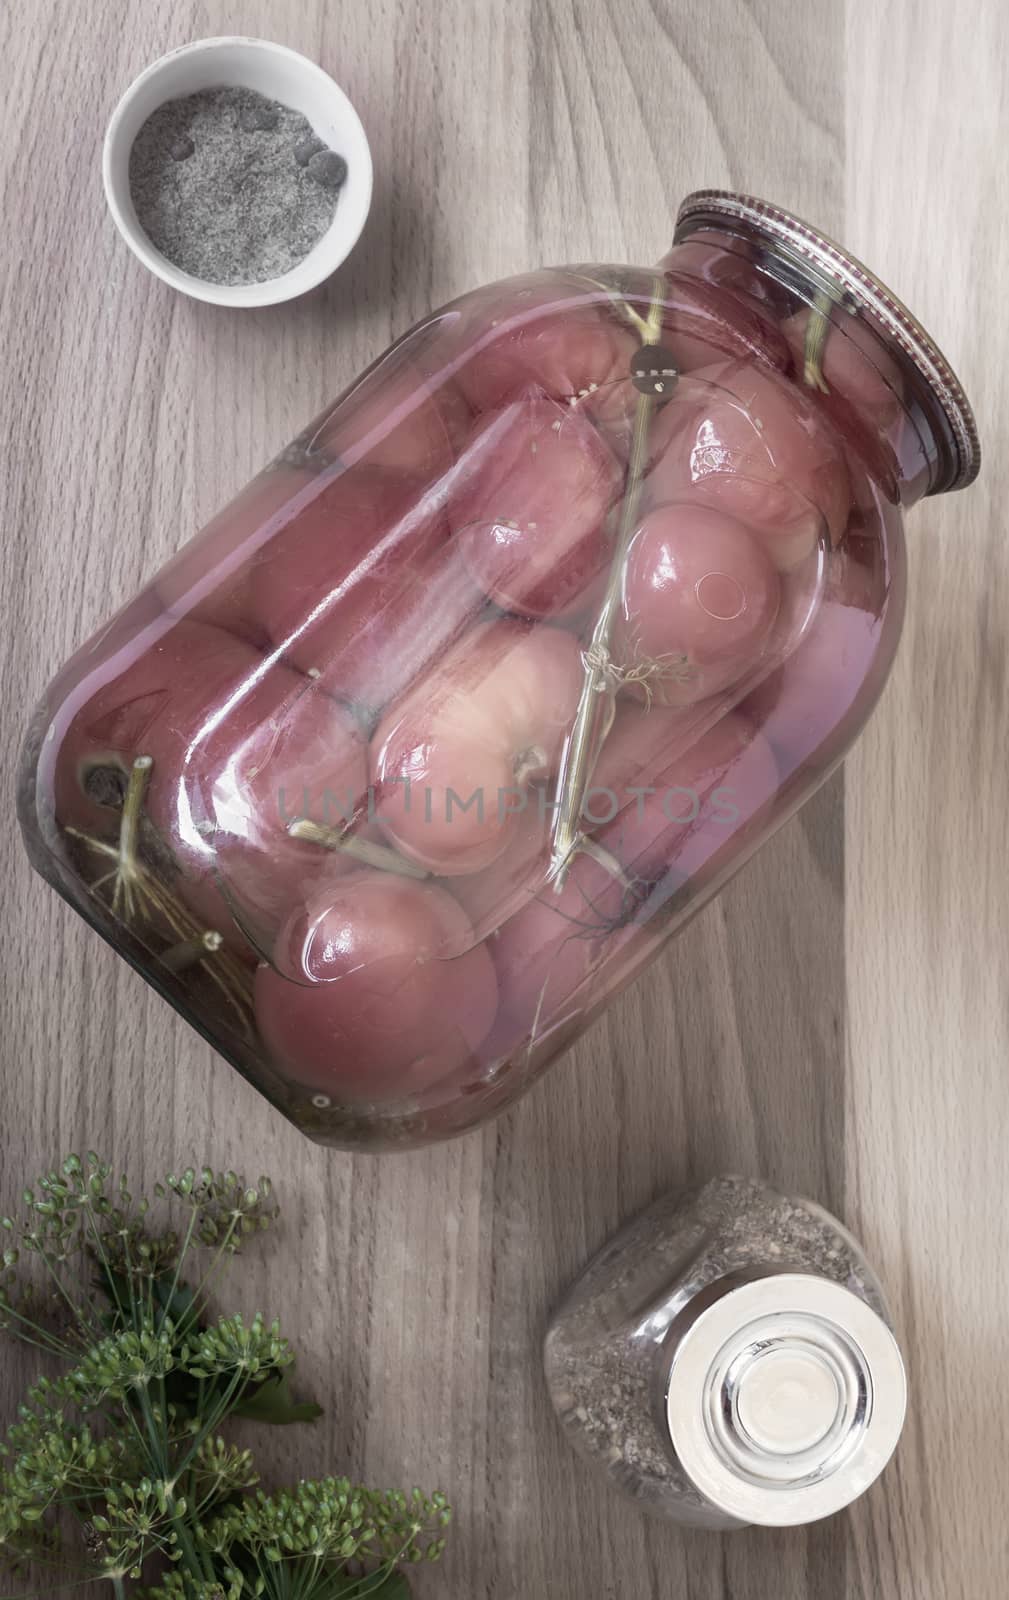 Home preservation: a large glass jar with red ripe pickled tomatoes, closed with a metal lid, next to spices and herbs. Top view, close-up.